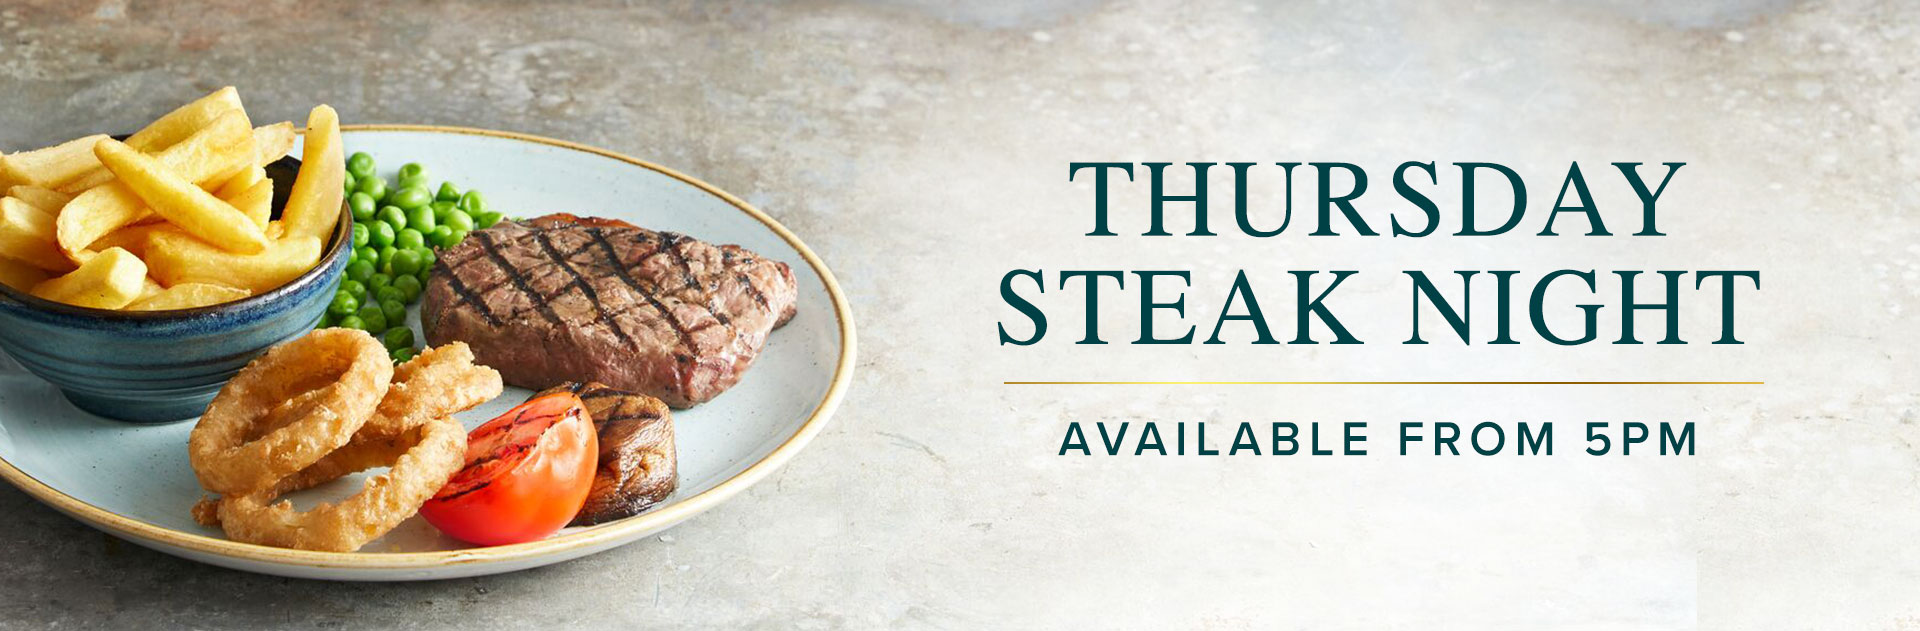 Thursday Steak Night at The Mawney Arms